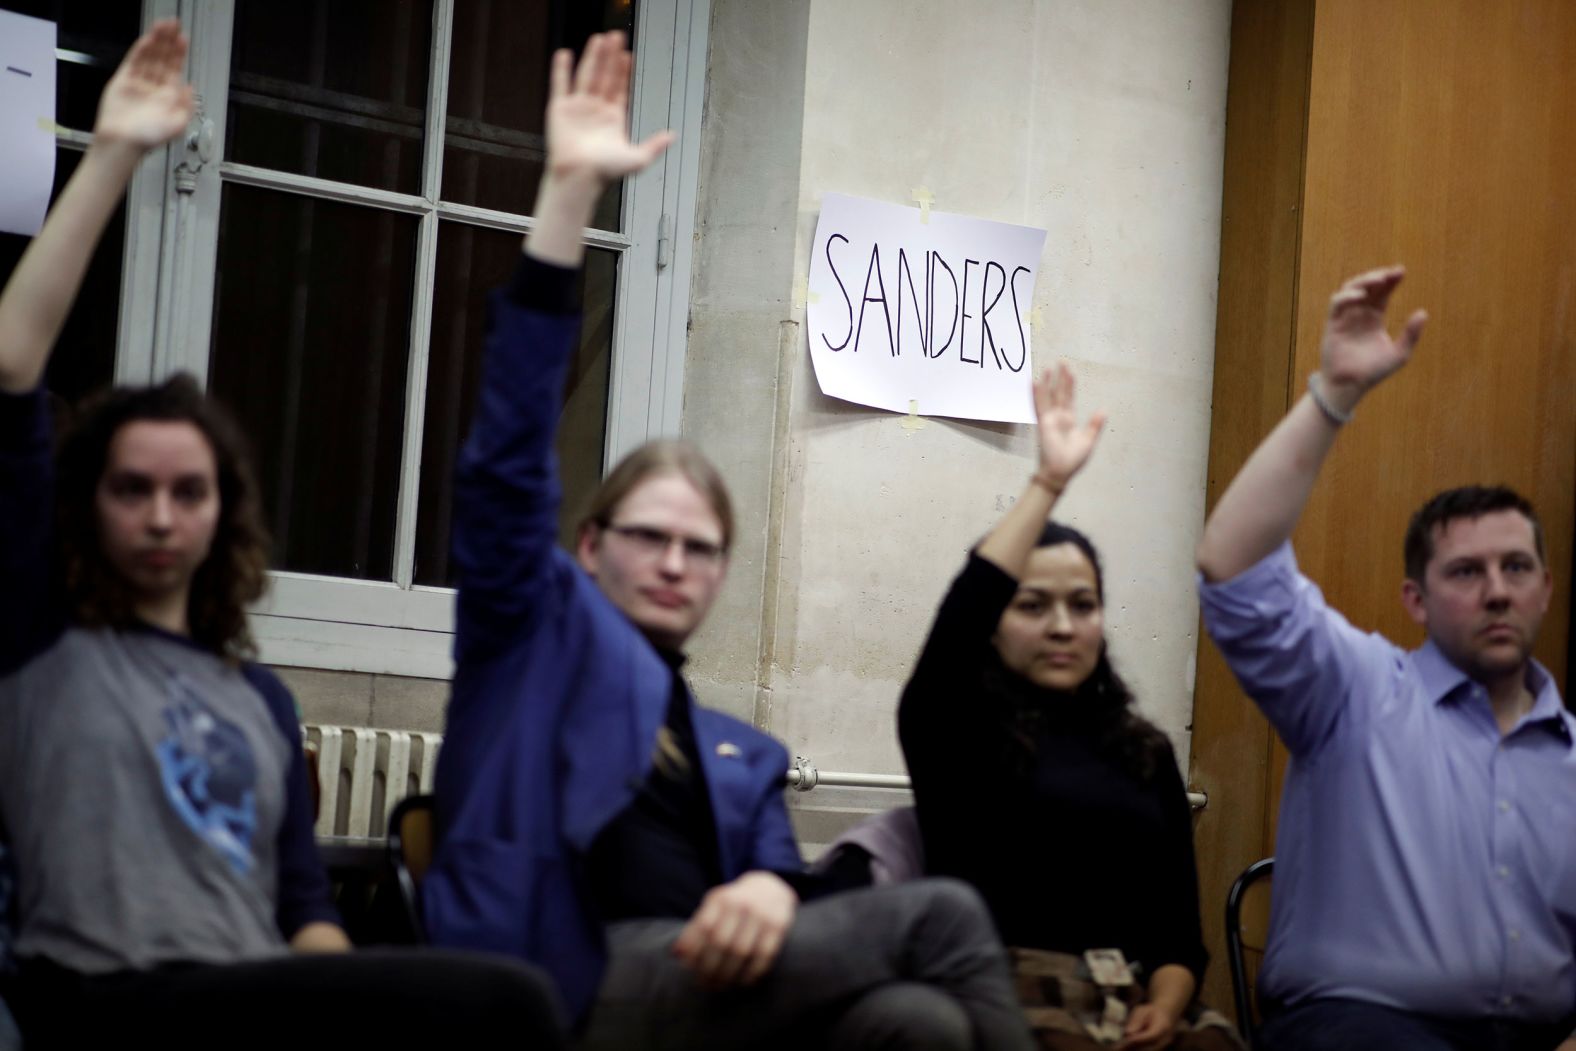 Iowa voters in Paris raise their hand as they gather to caucus.